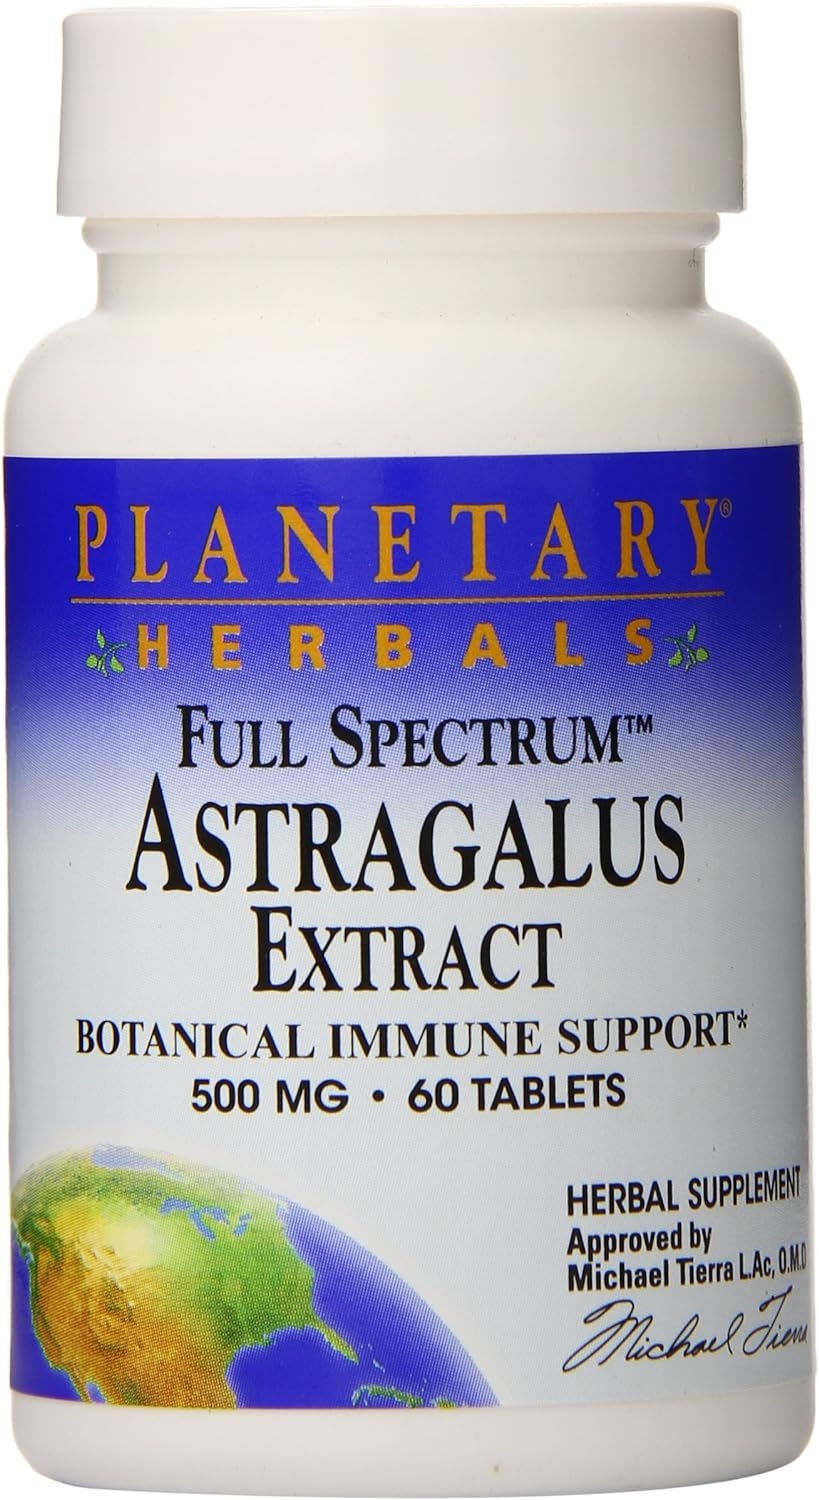 Planetary Herbals Astragalus Extract, Full Spectrum 500 mg Botanical for Immune System Support - 120 Tablets